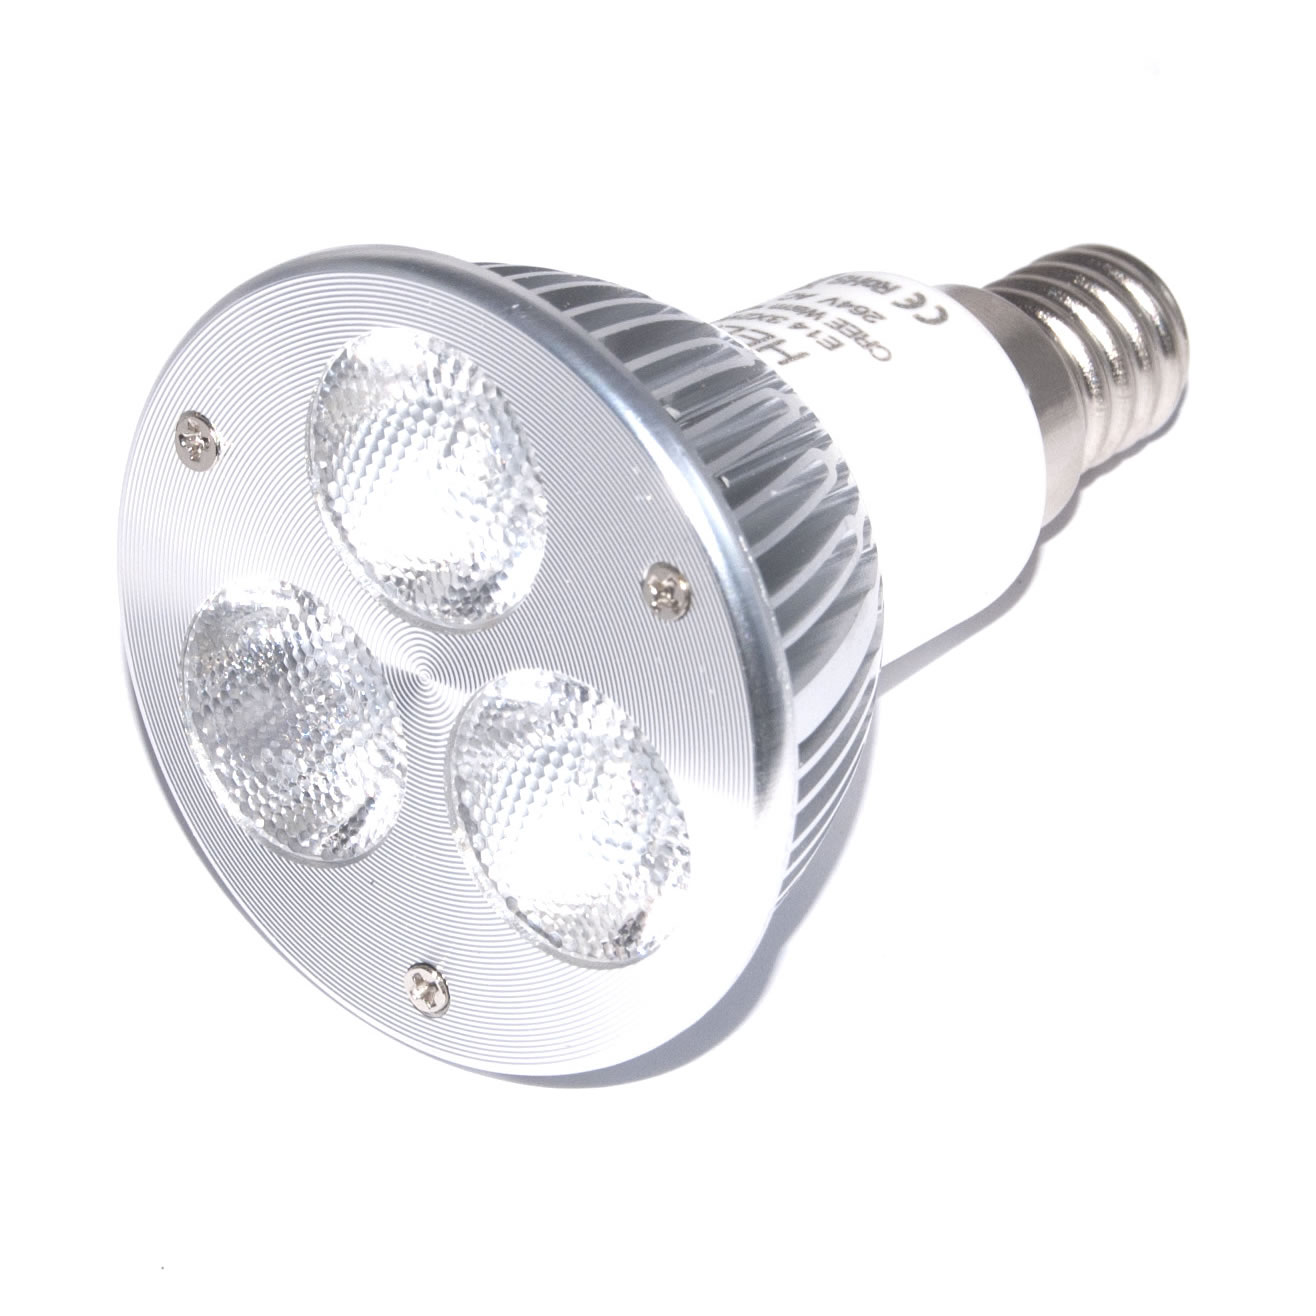 Ounce Peuter louter E14 Powerled CREE 3x2W Power LED Spot 6 watt Warm wit | Powerled-verlichting